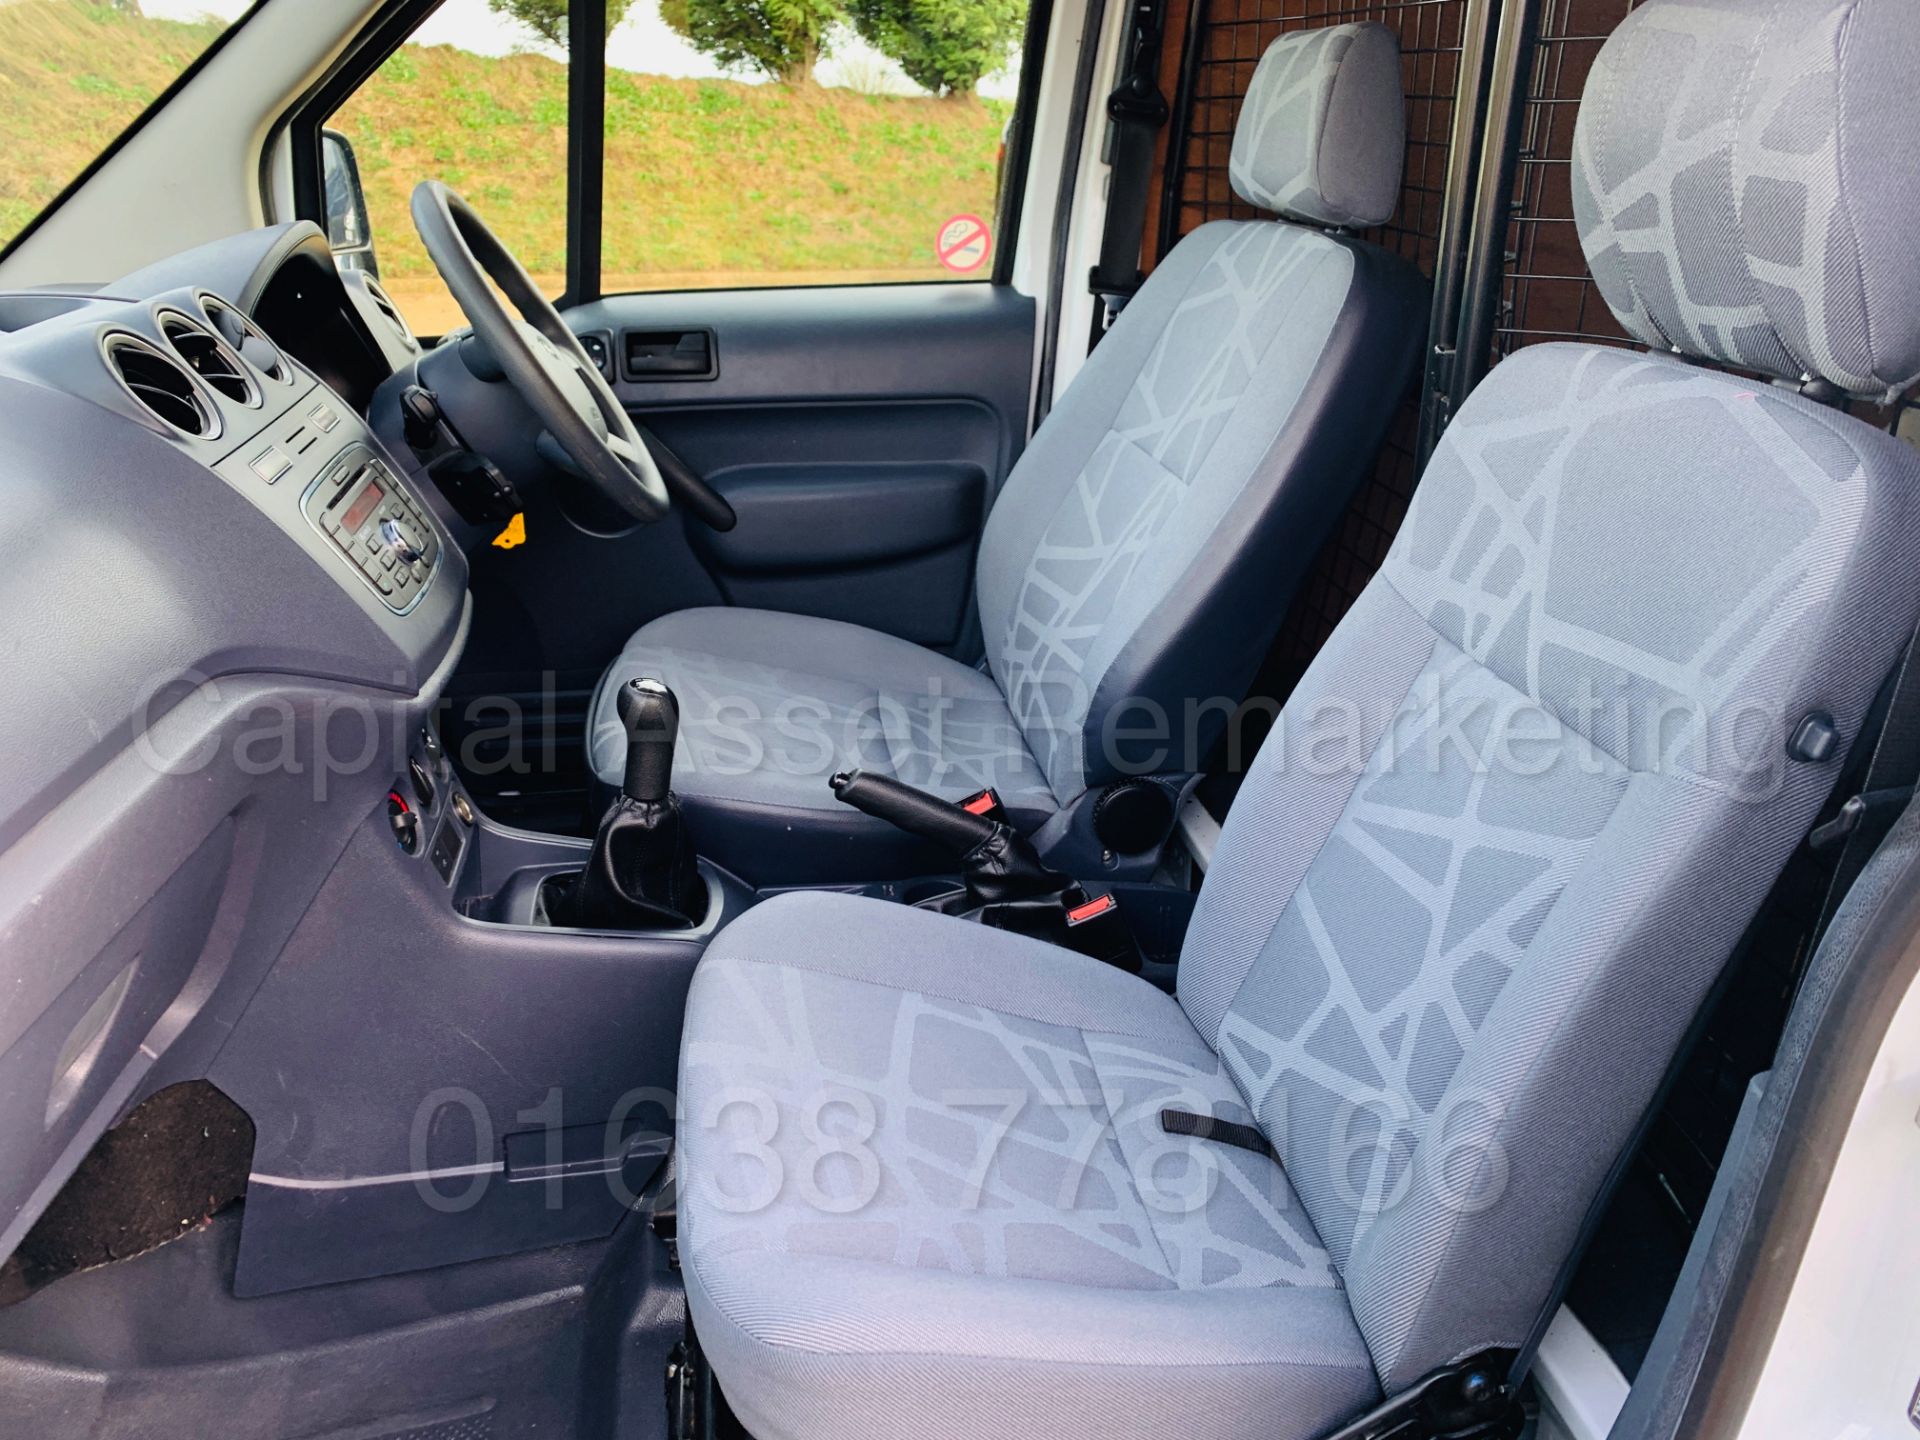 ON SALE FORD TRANSIT CONNECT T200 *LCV - PANEL VAN* (2013 MODEL) '1.8 TDCI -*LOW MILES - Image 16 of 30